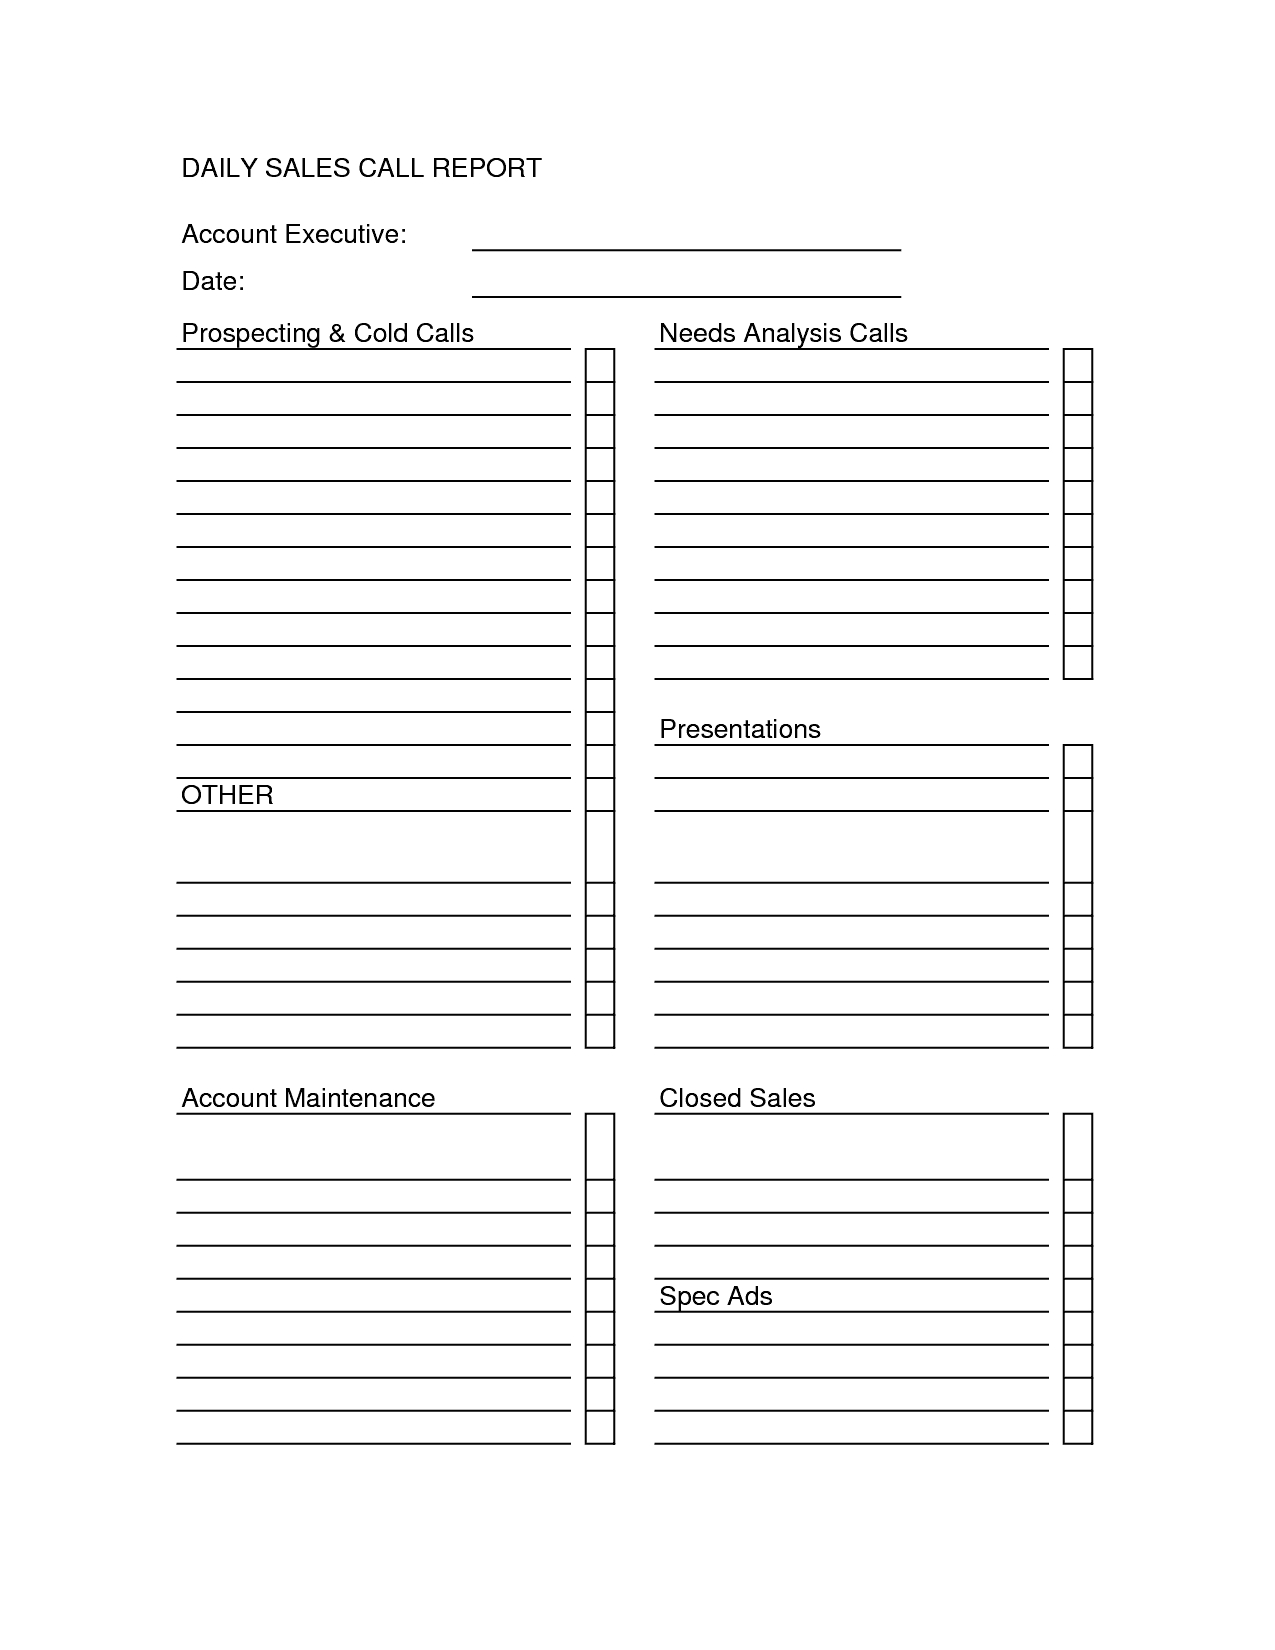 Sales Call Report Templates - Word Excel Fomats For Sales Call Report Template